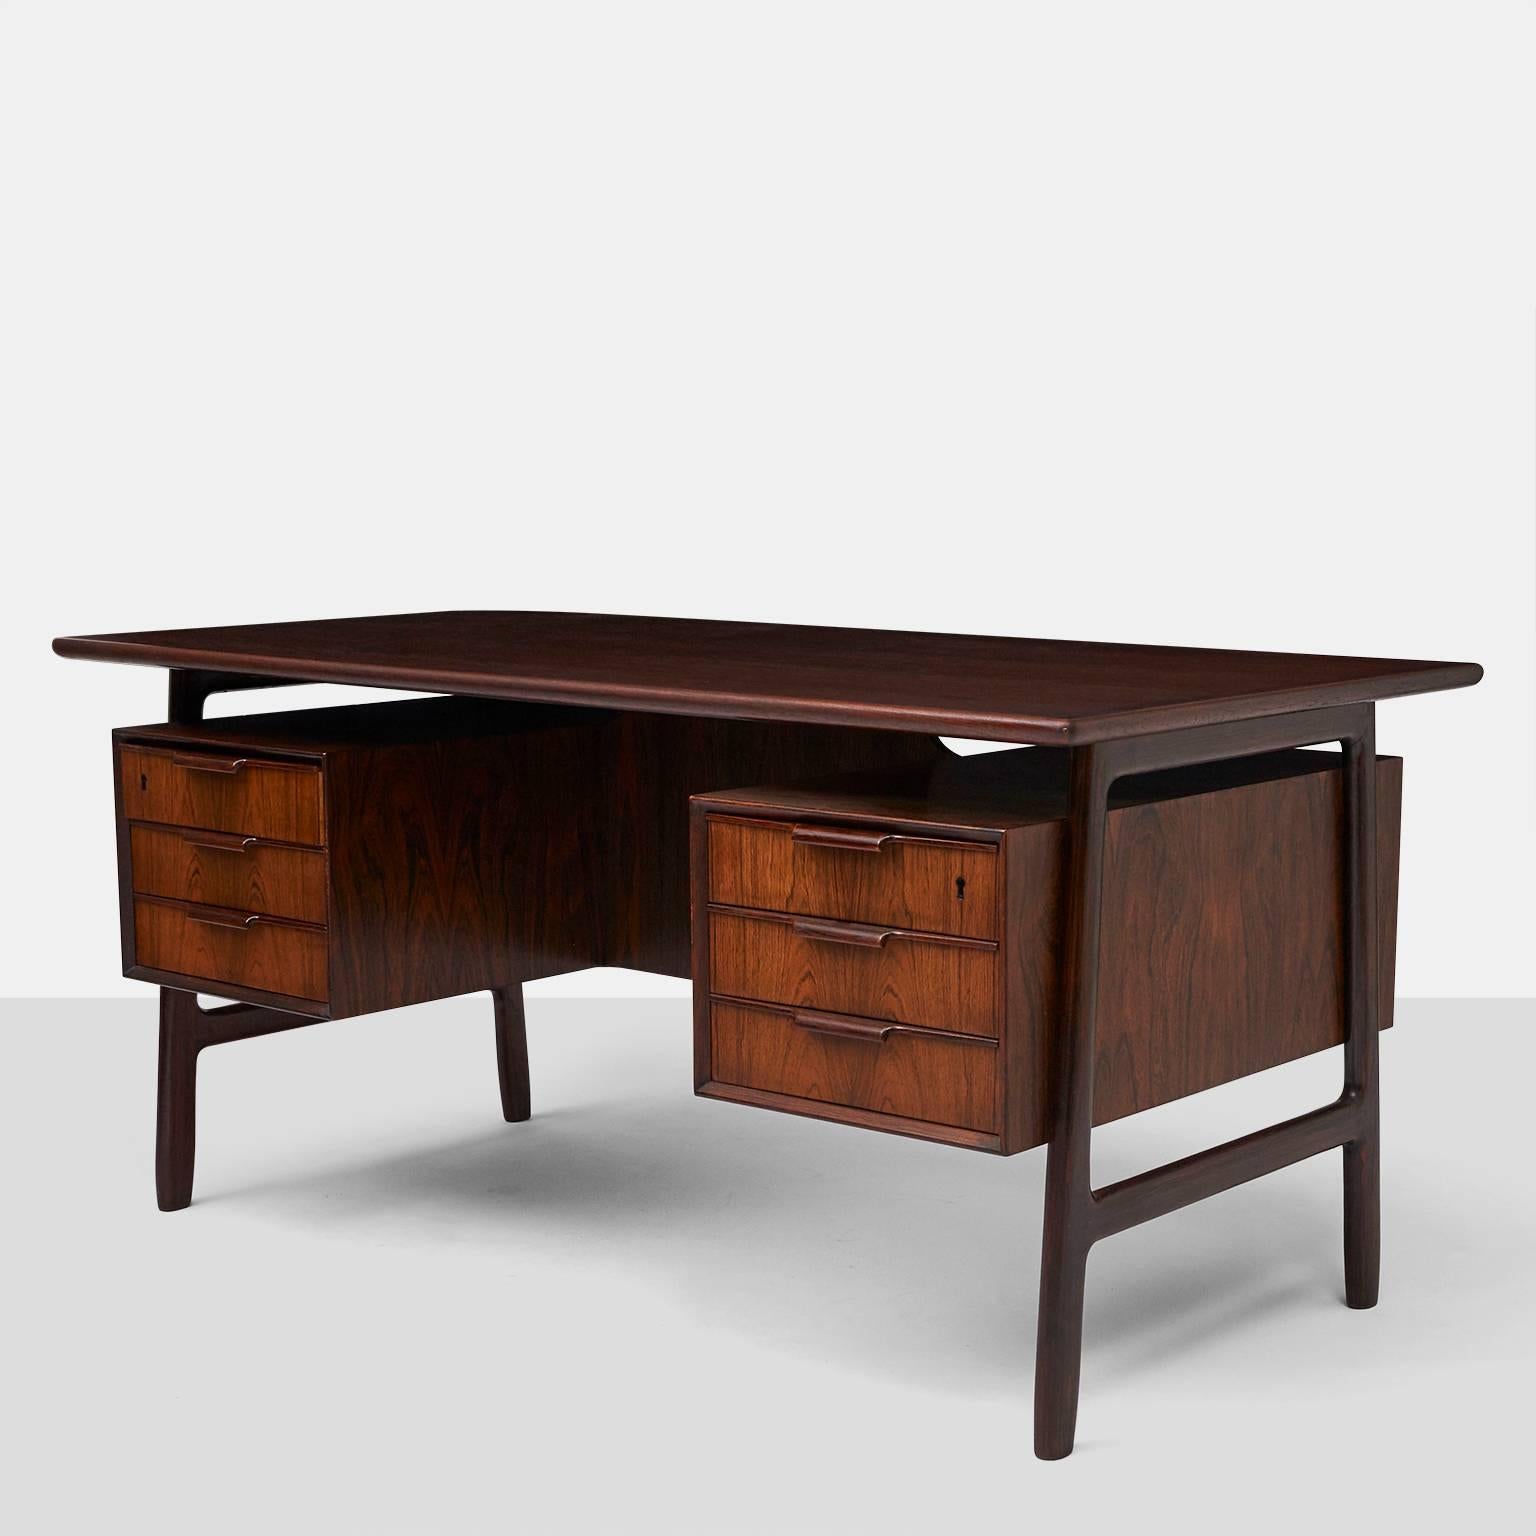 An Omann Jun rosewood Executive desk model #75. The front side has two pedestals with three drawers in each. The backside with two shelves, a storage compartment with drop down door and one privacy flap,
Denmark, circa 1950s.
  